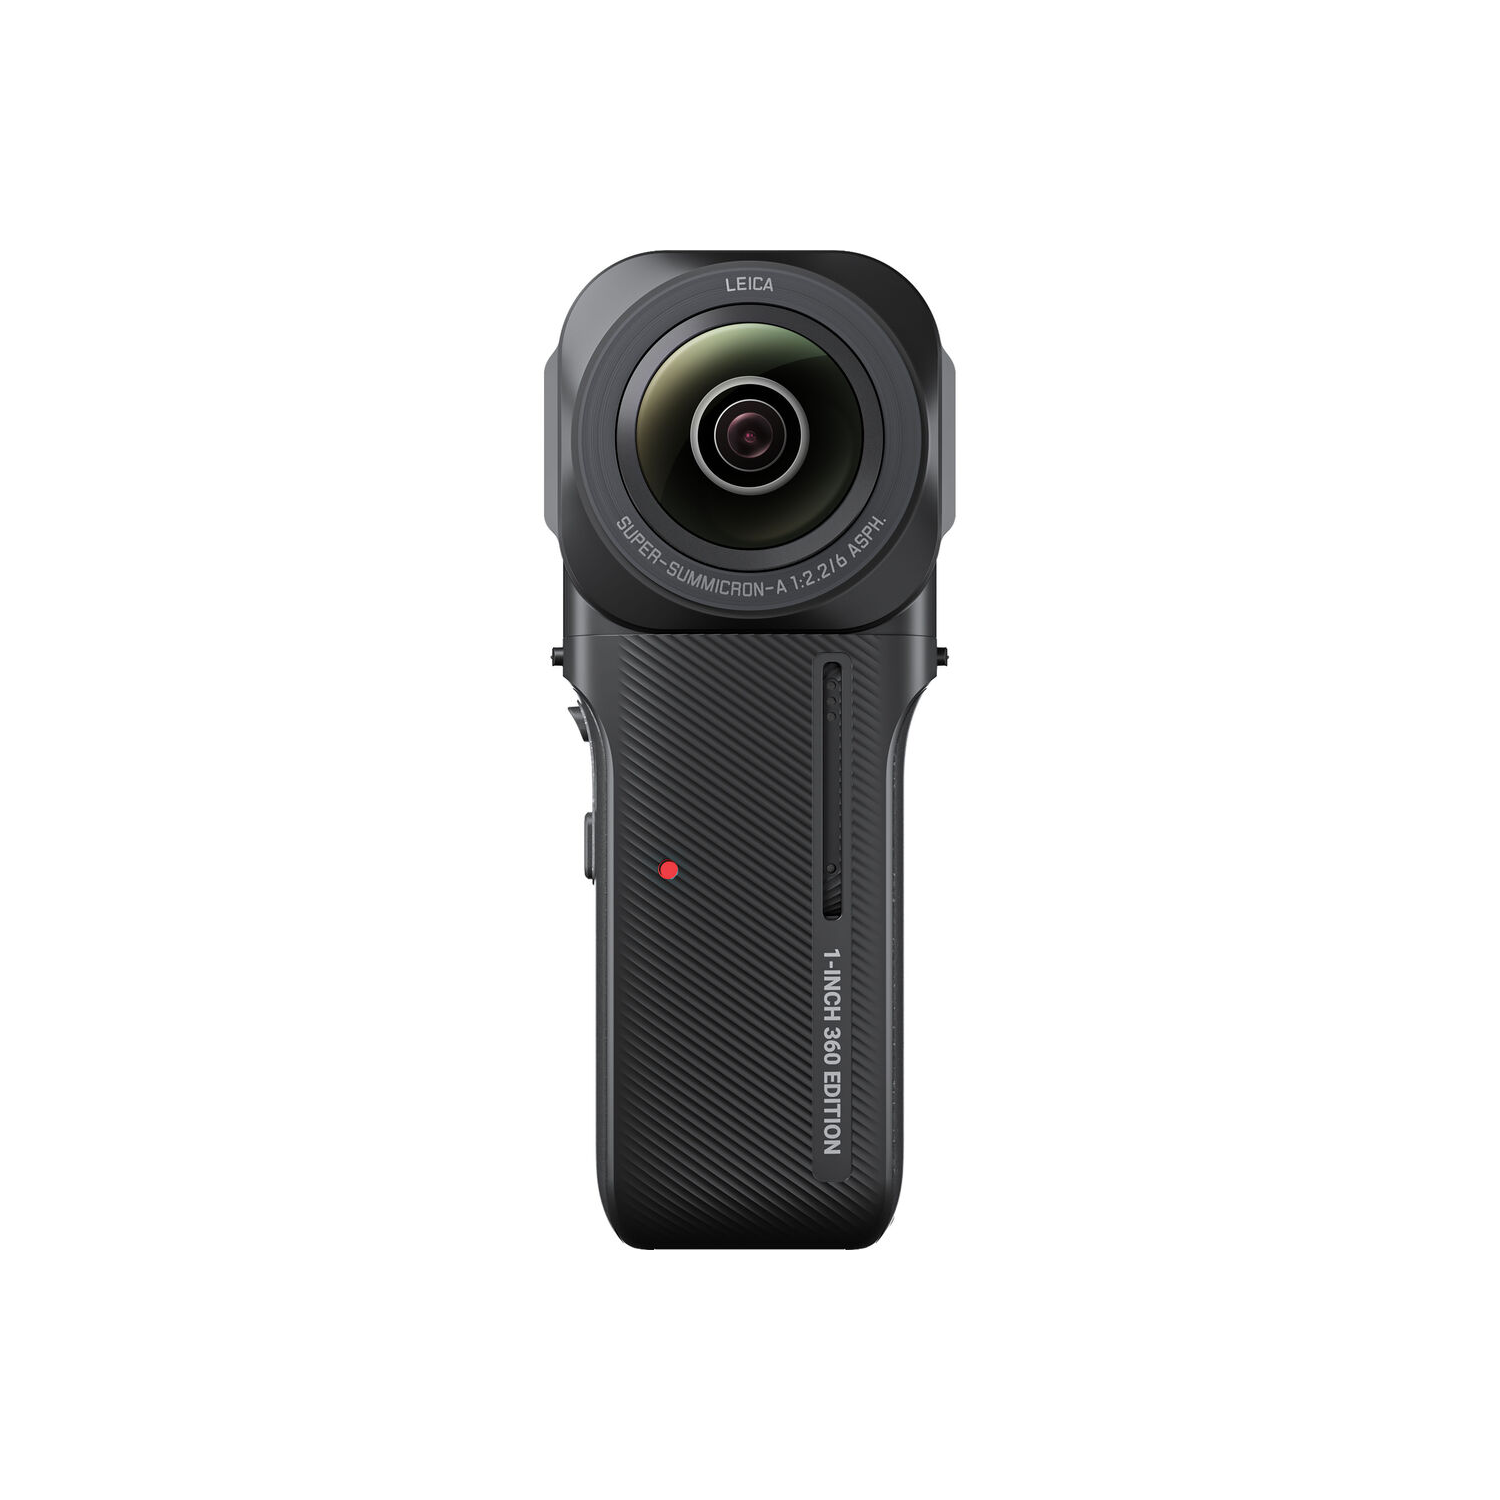 Insta360 RS 1-Inch 360 Edition